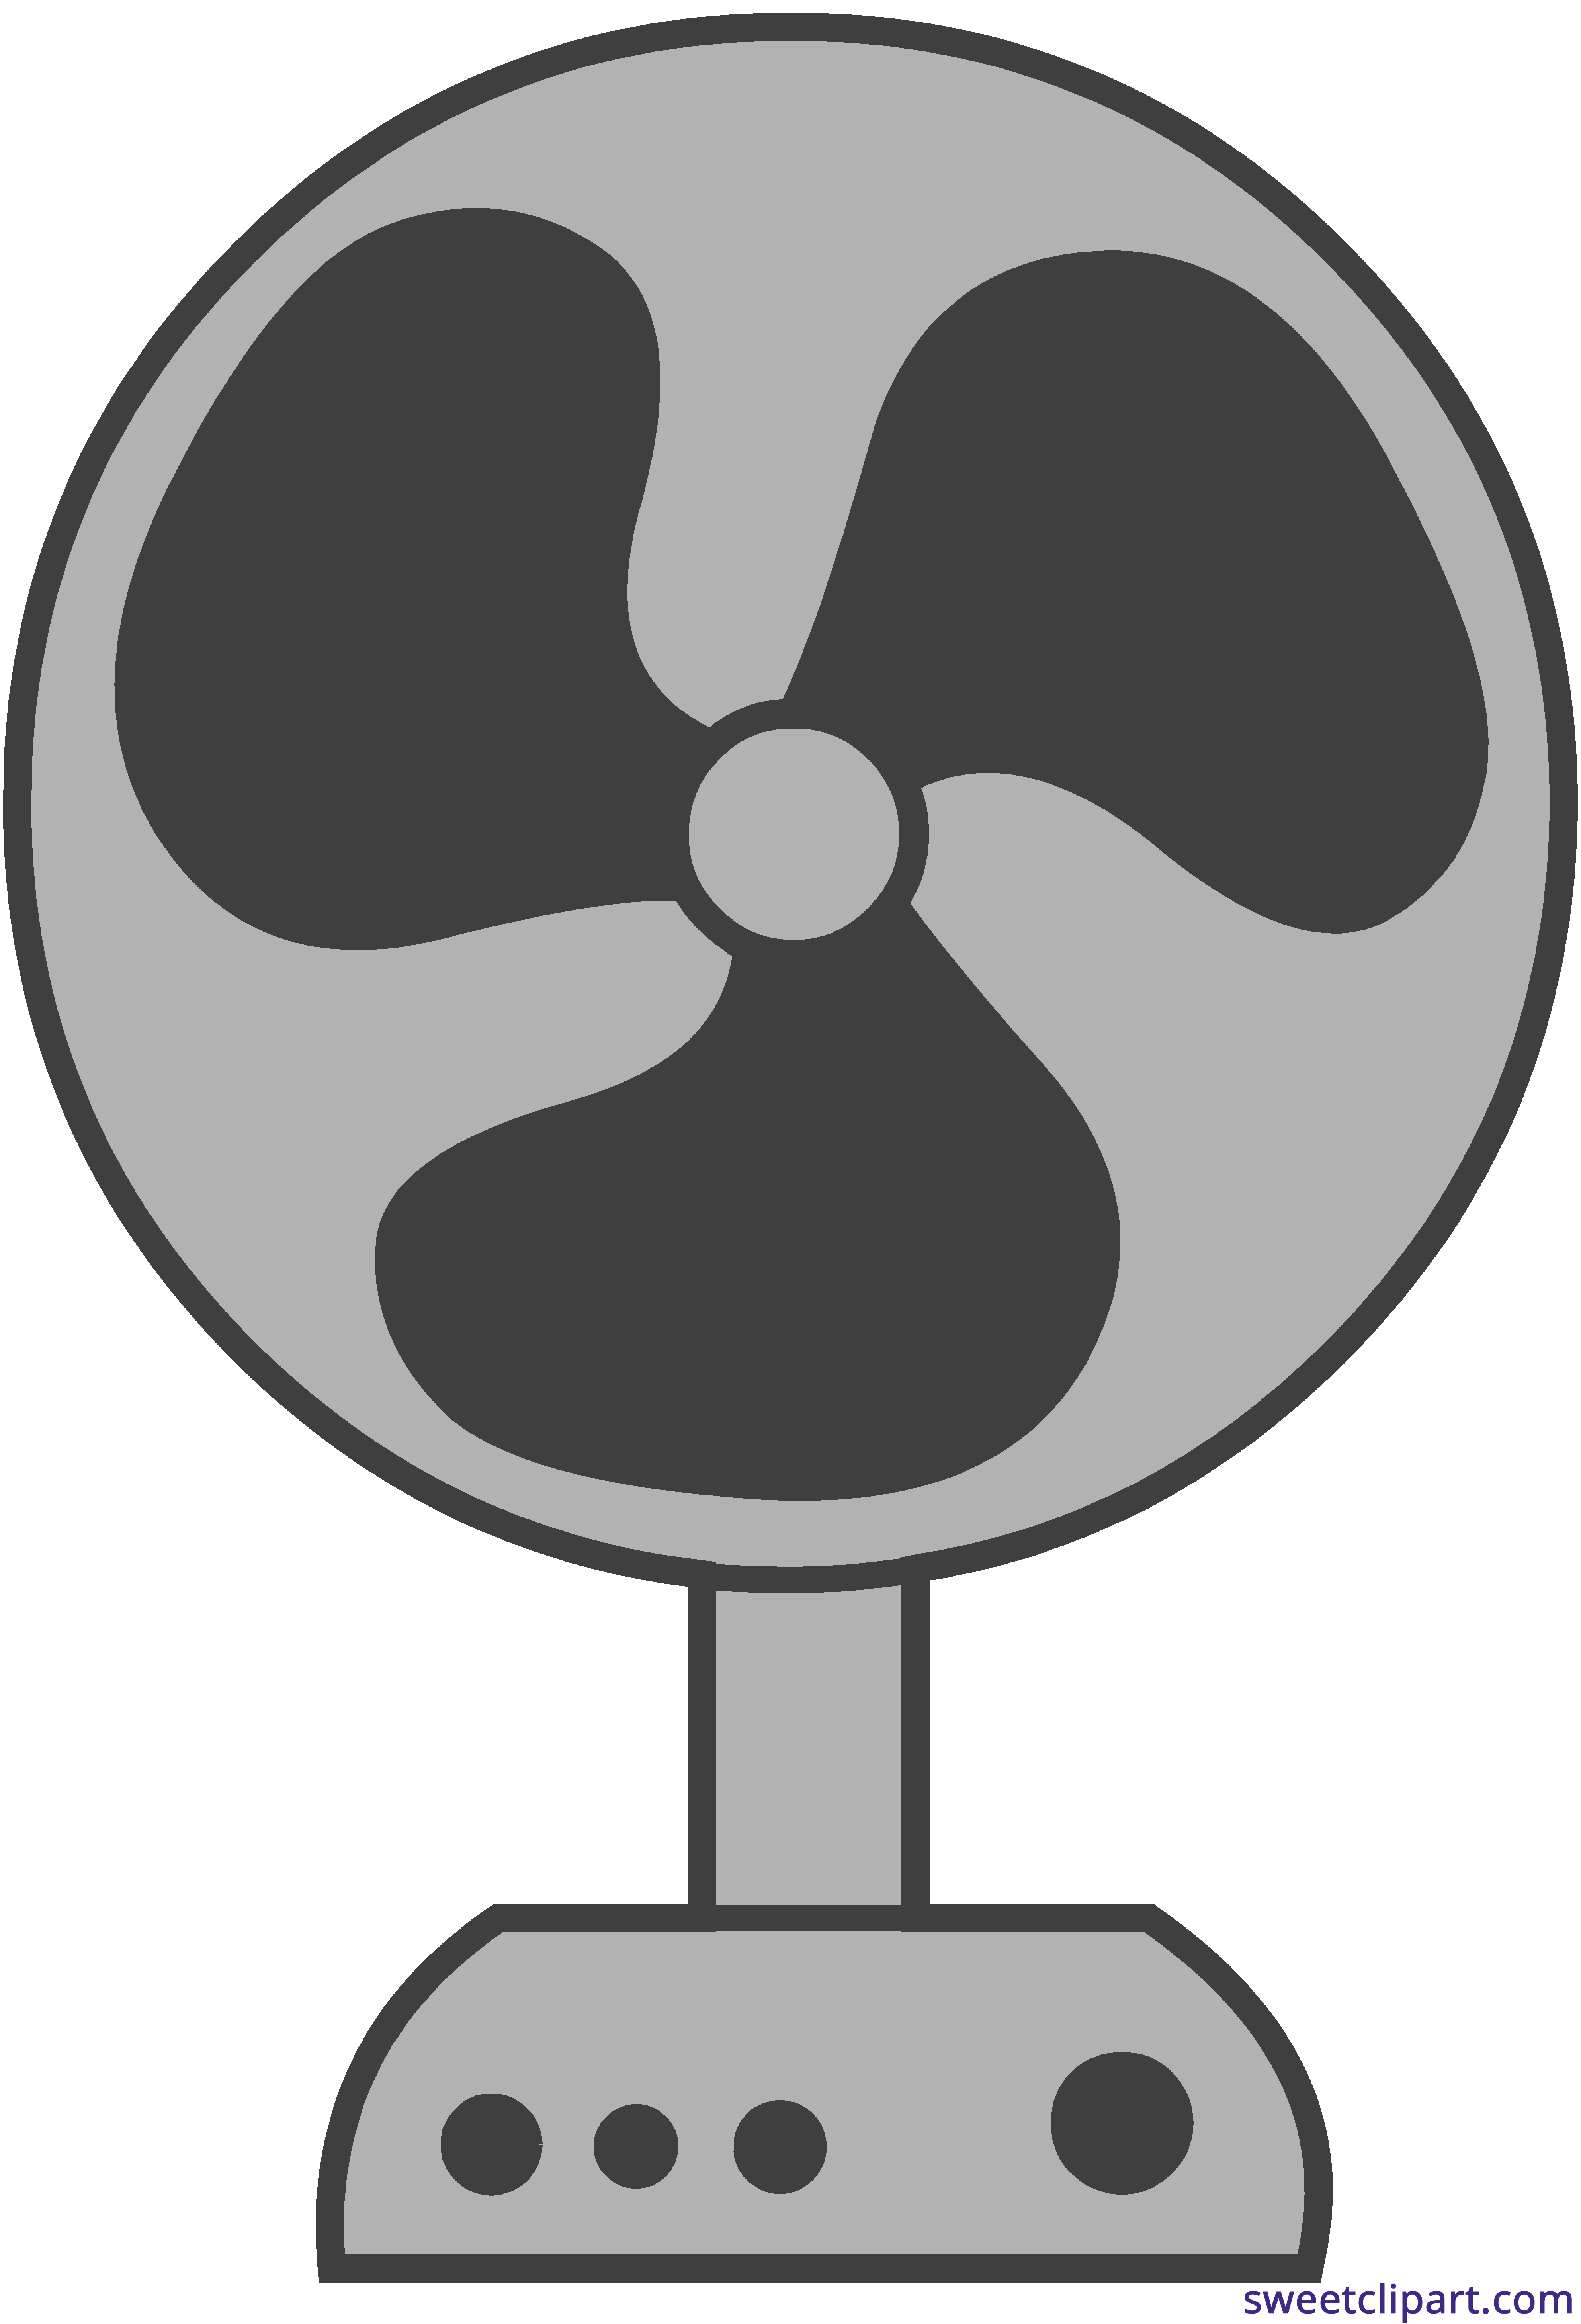 Electric fan sweet clip. Electricity clipart electrical technology